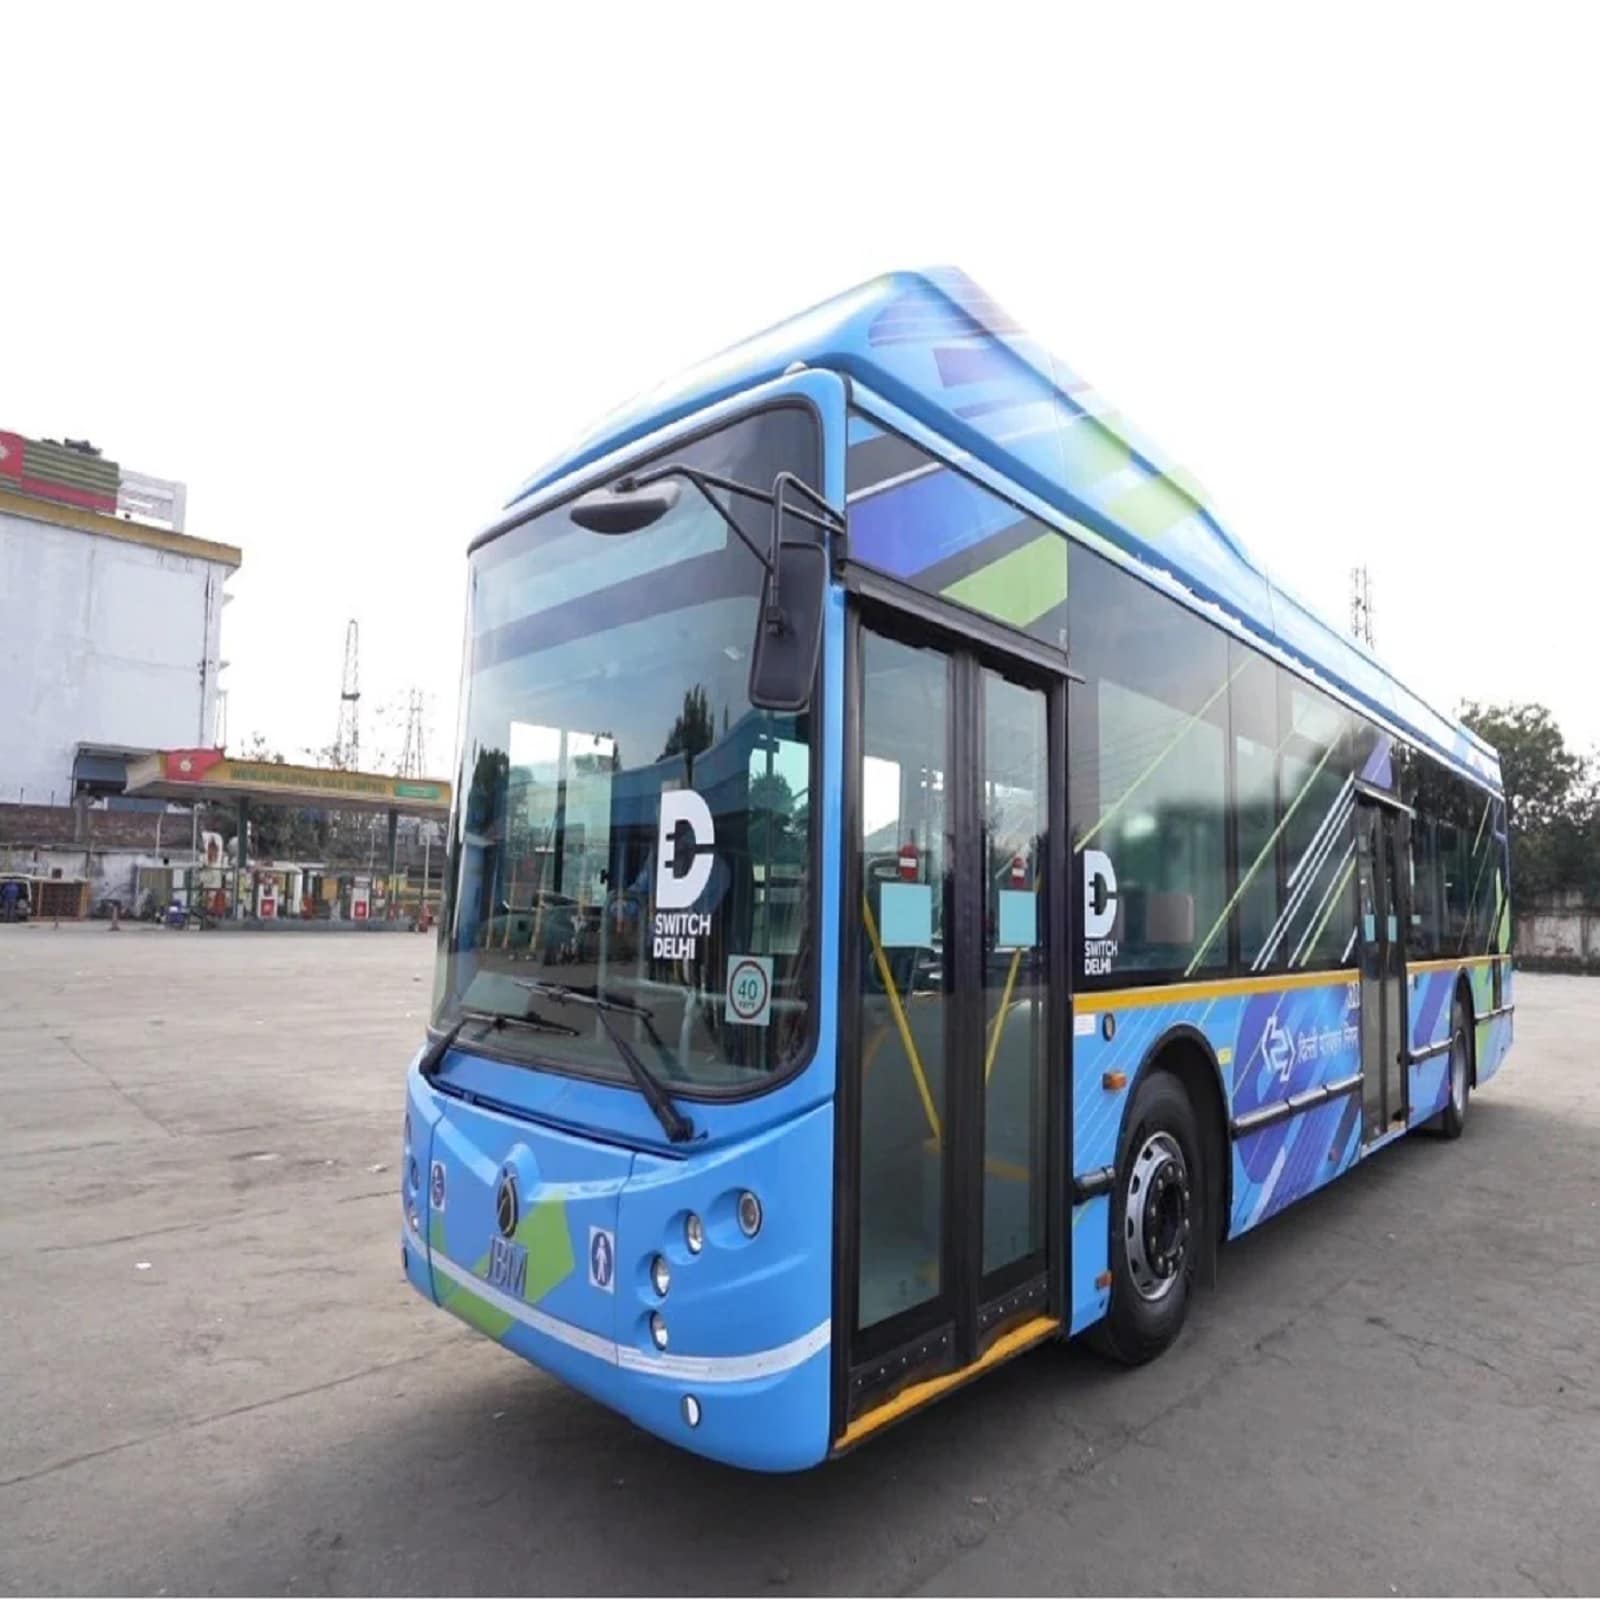 DTC is going to launch 300 electric buses very soon, know about their routes and fares, delhi news, e bus in delhi, e bus news, delhi e bus news,DTC to add 300 new electric buses till April know about their routes and fares nodrss